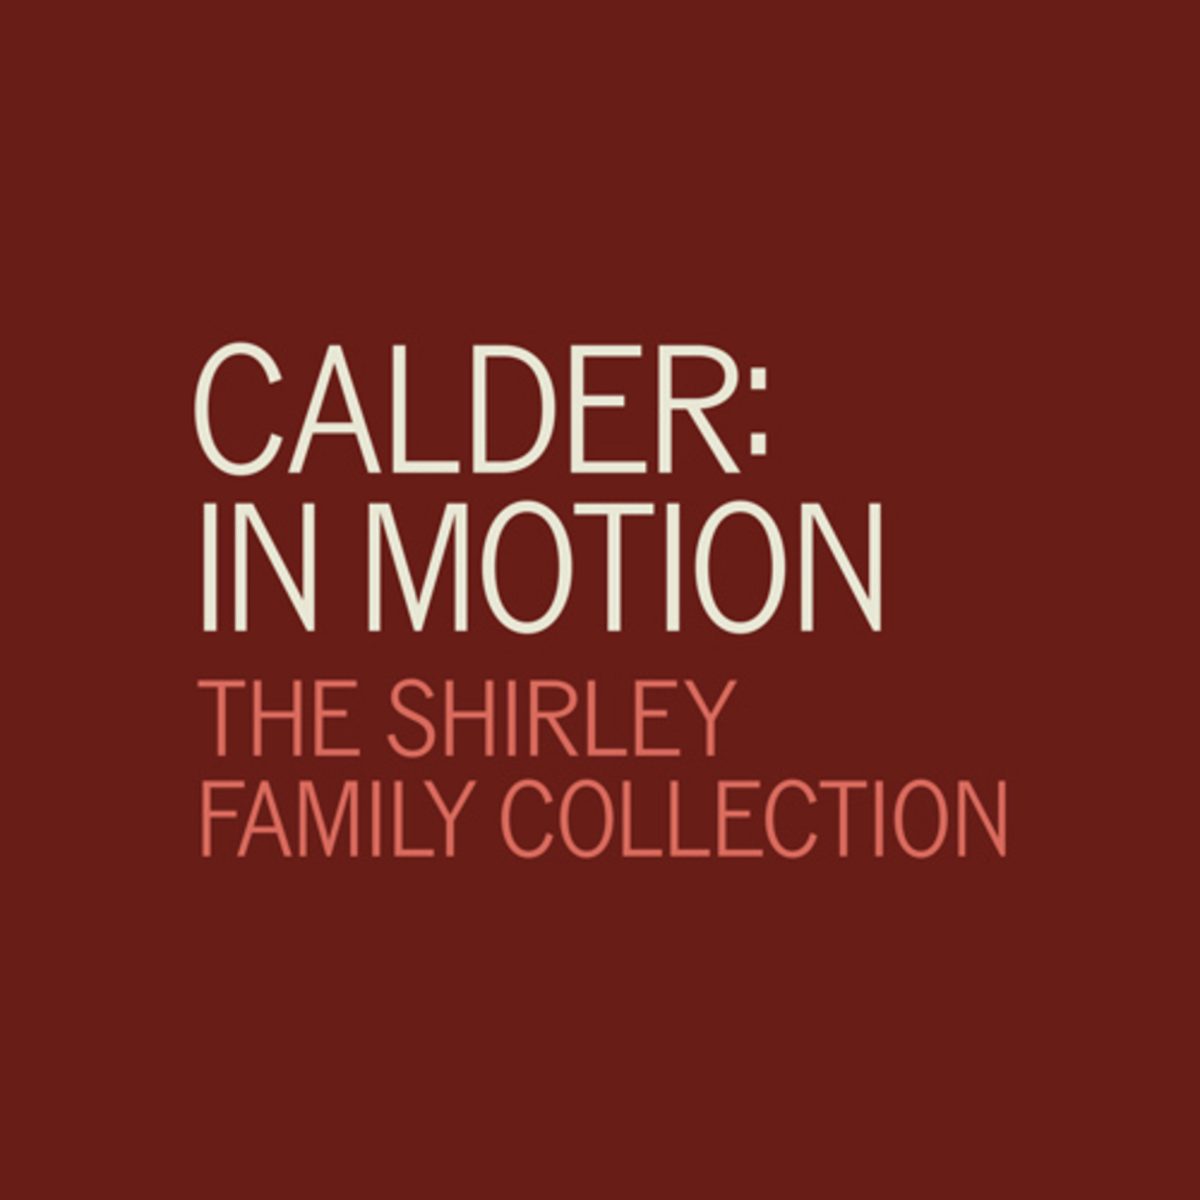 Calder Smartphone Tour: Introduction to the SAM Exhibition